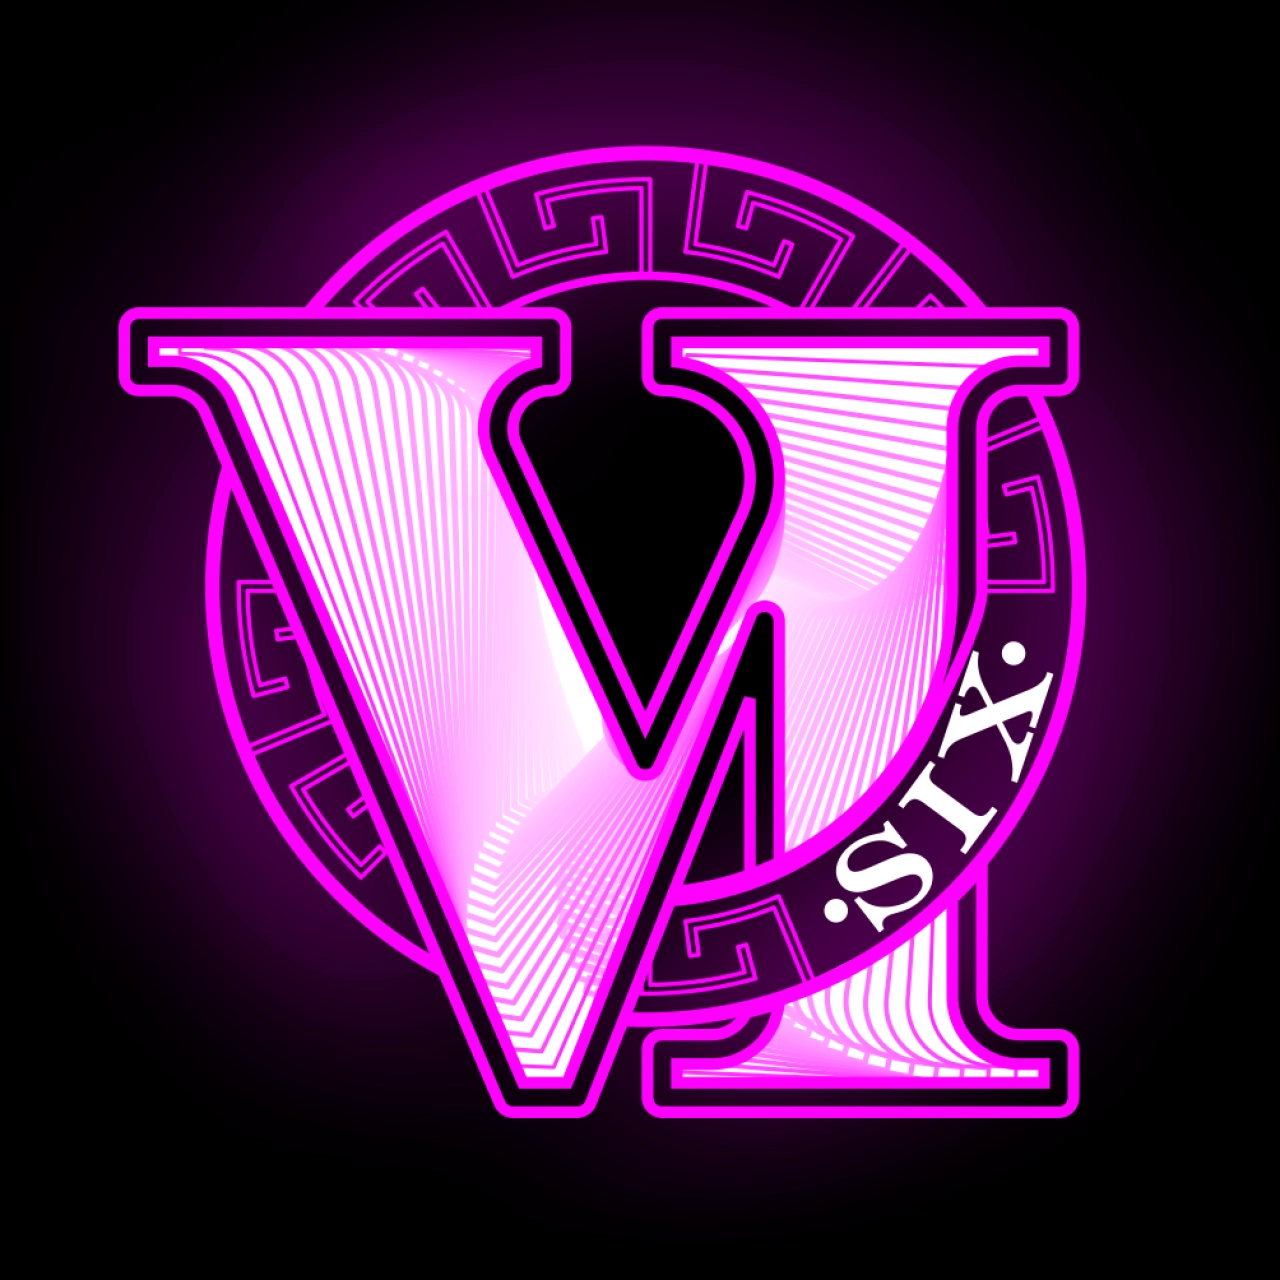 Grand Theft Auto VI Medallion by DynamicLimit